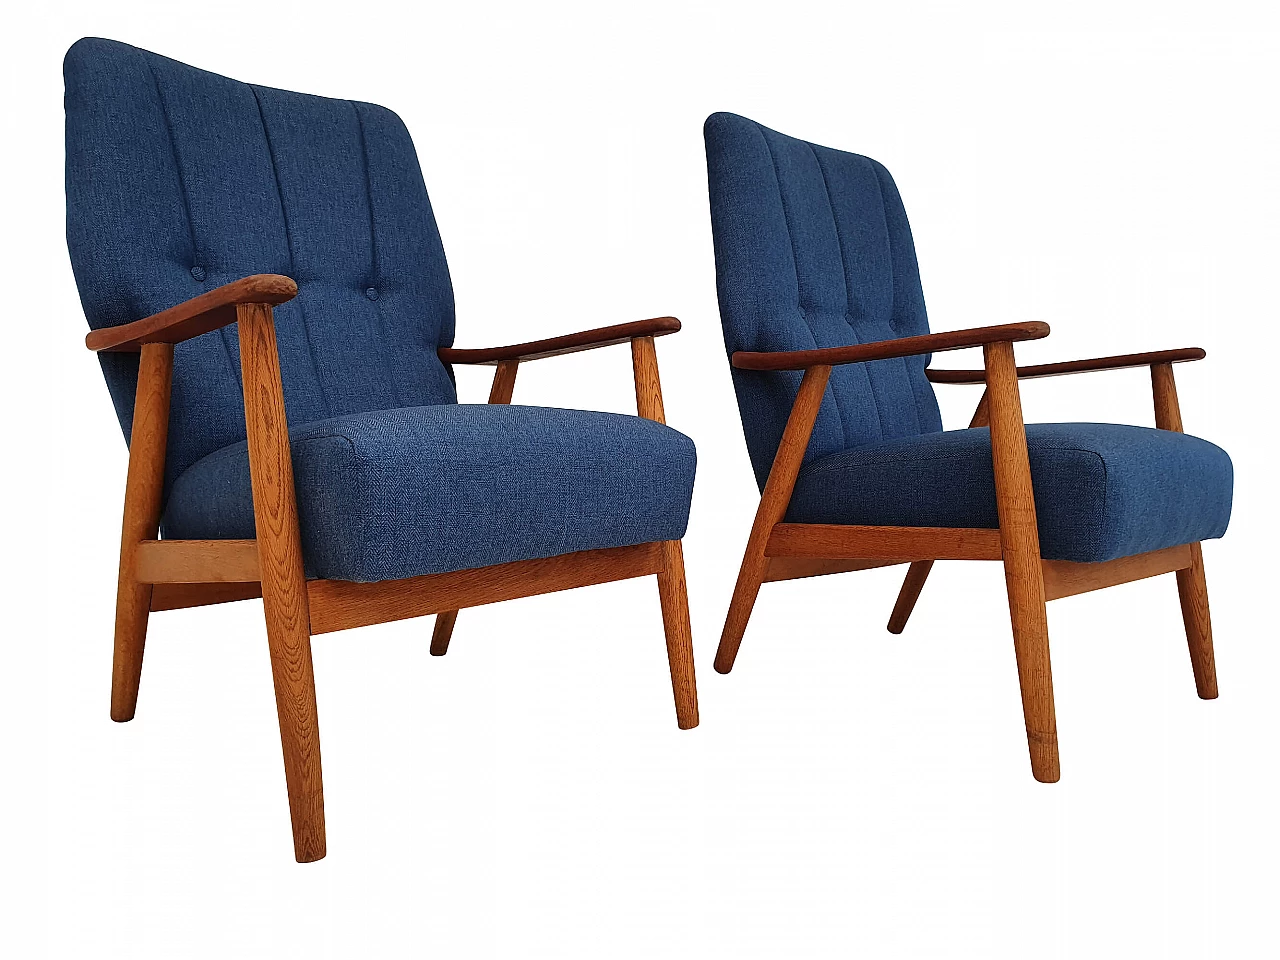 Danish armchair in teak and oak, 70's, two available 1098390